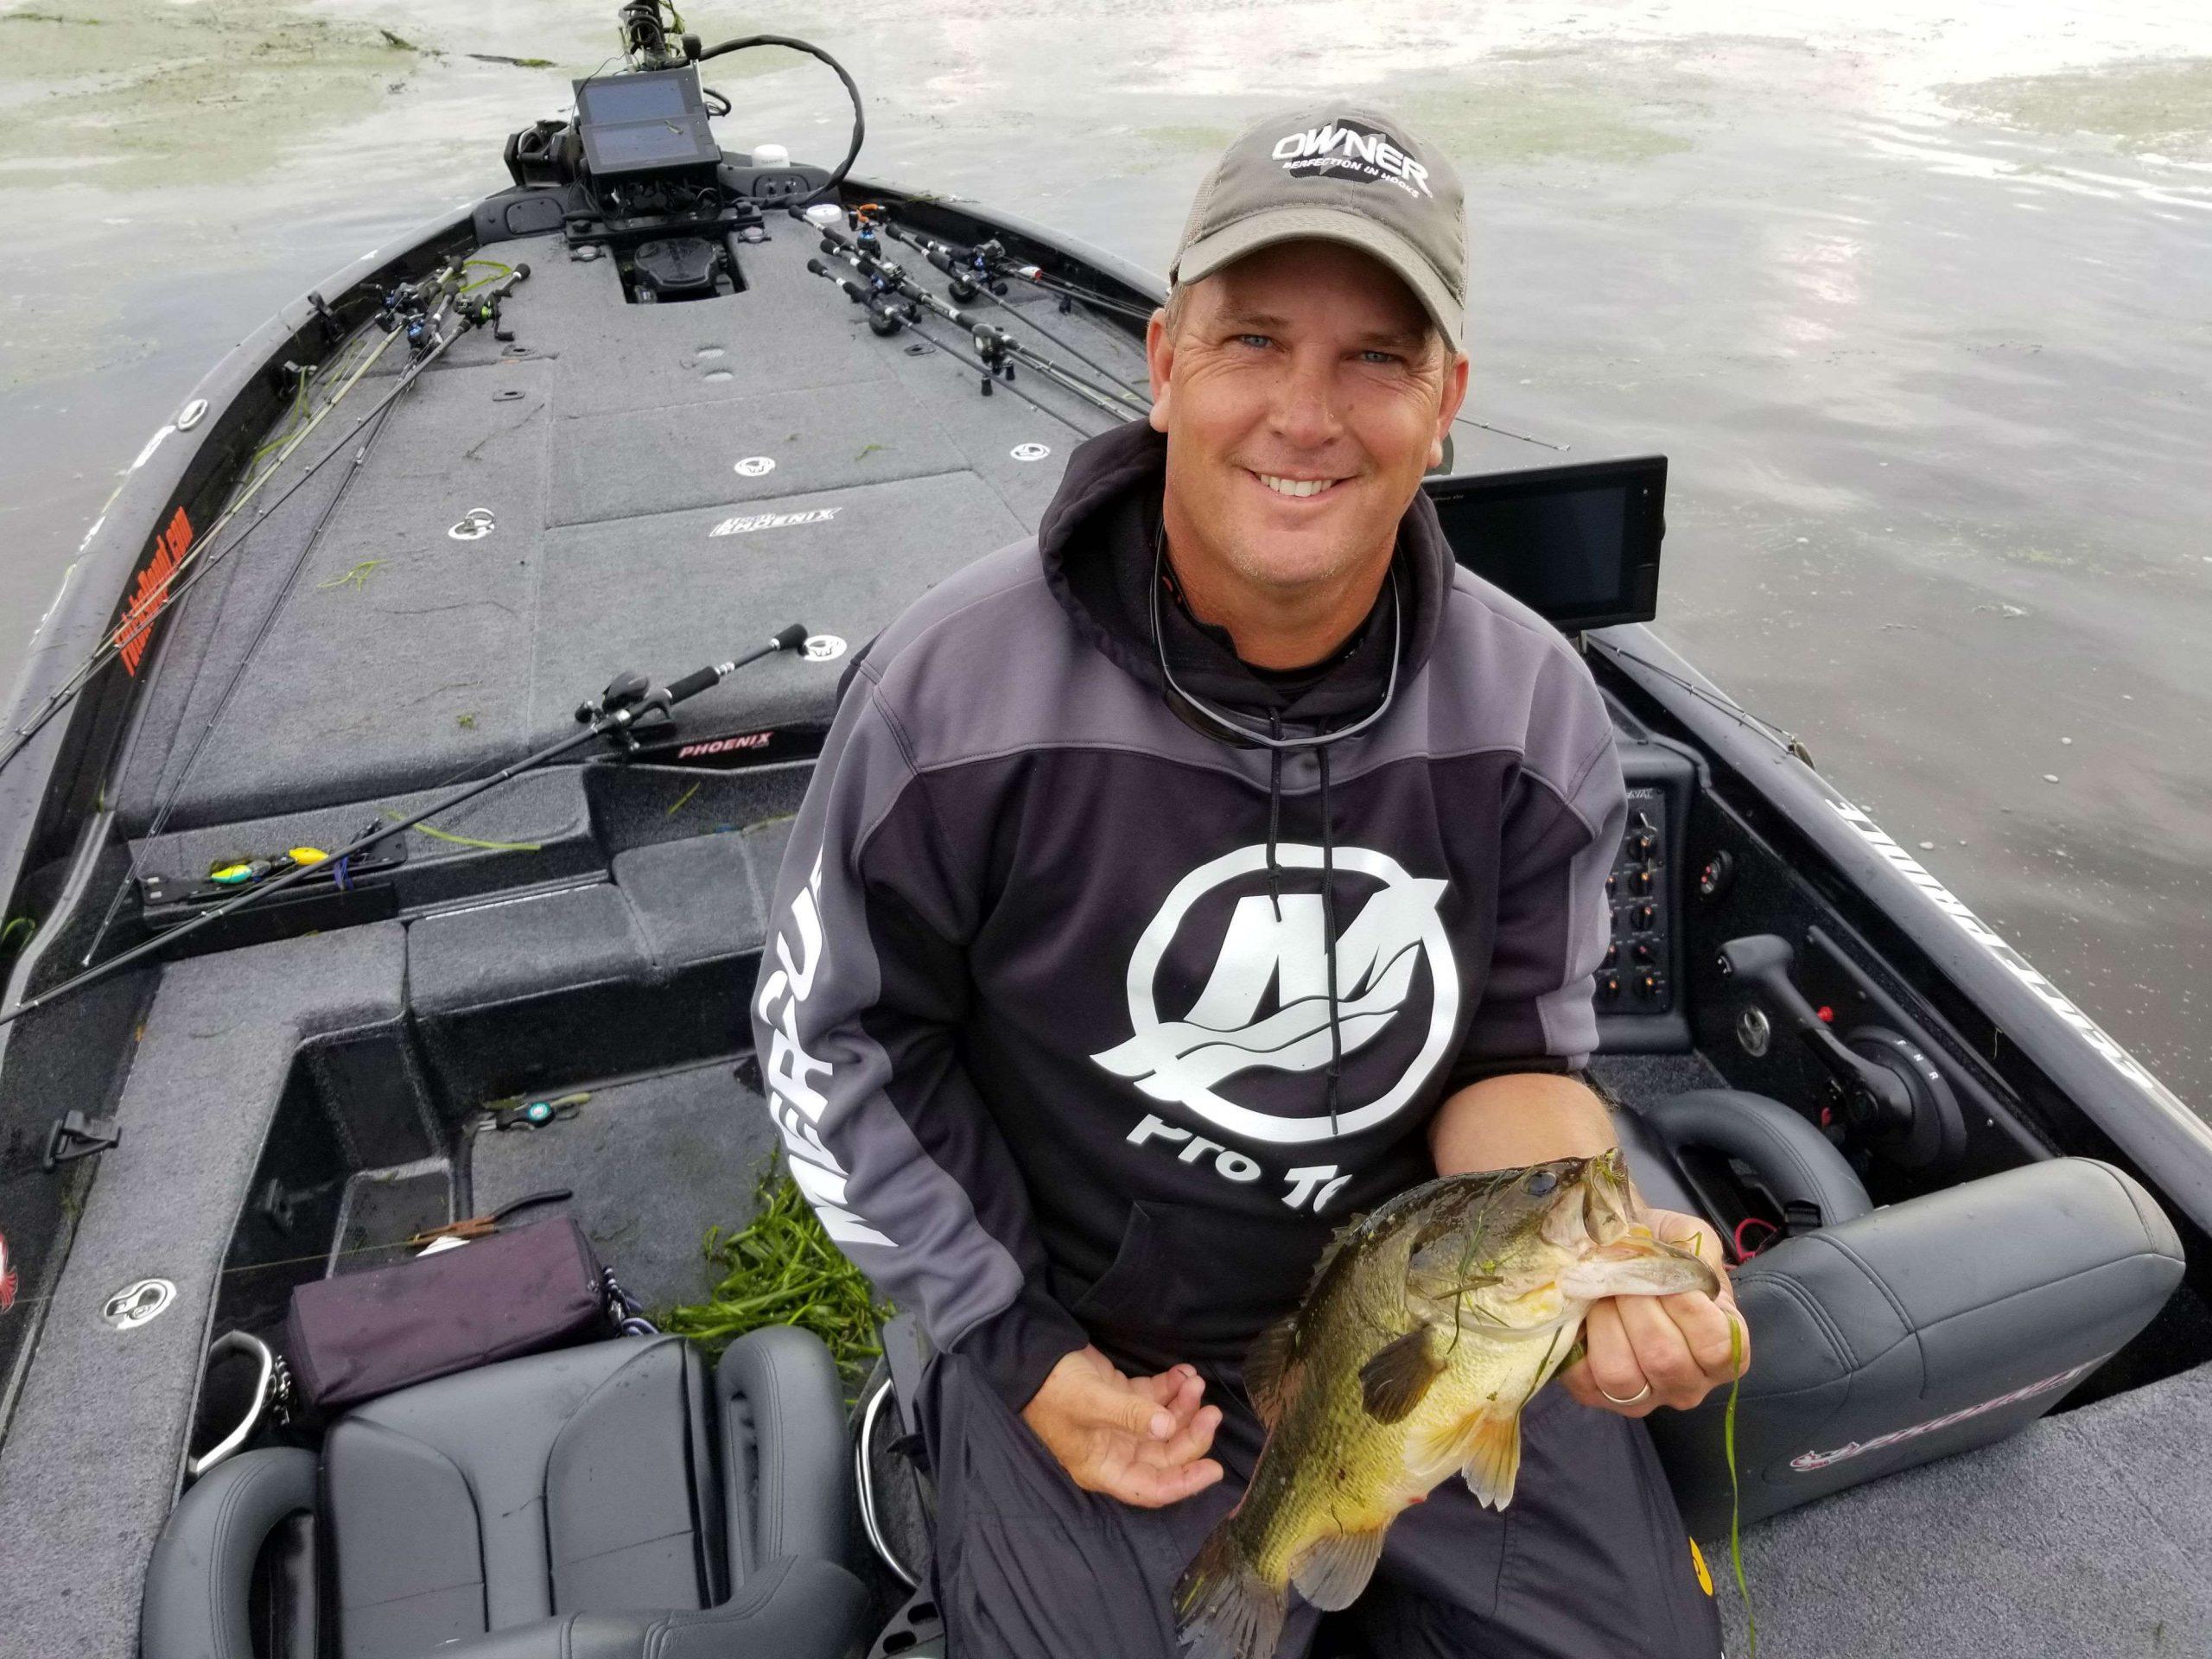 Cliff Prince with his third keeper of the morning, a solid Largemouth! He has been working this same grass mat for about an hour. He's switching baits often and getting steady bites. Prince caught one 3-pounder here and feels like there's more in the area. 
3-pounders are the 